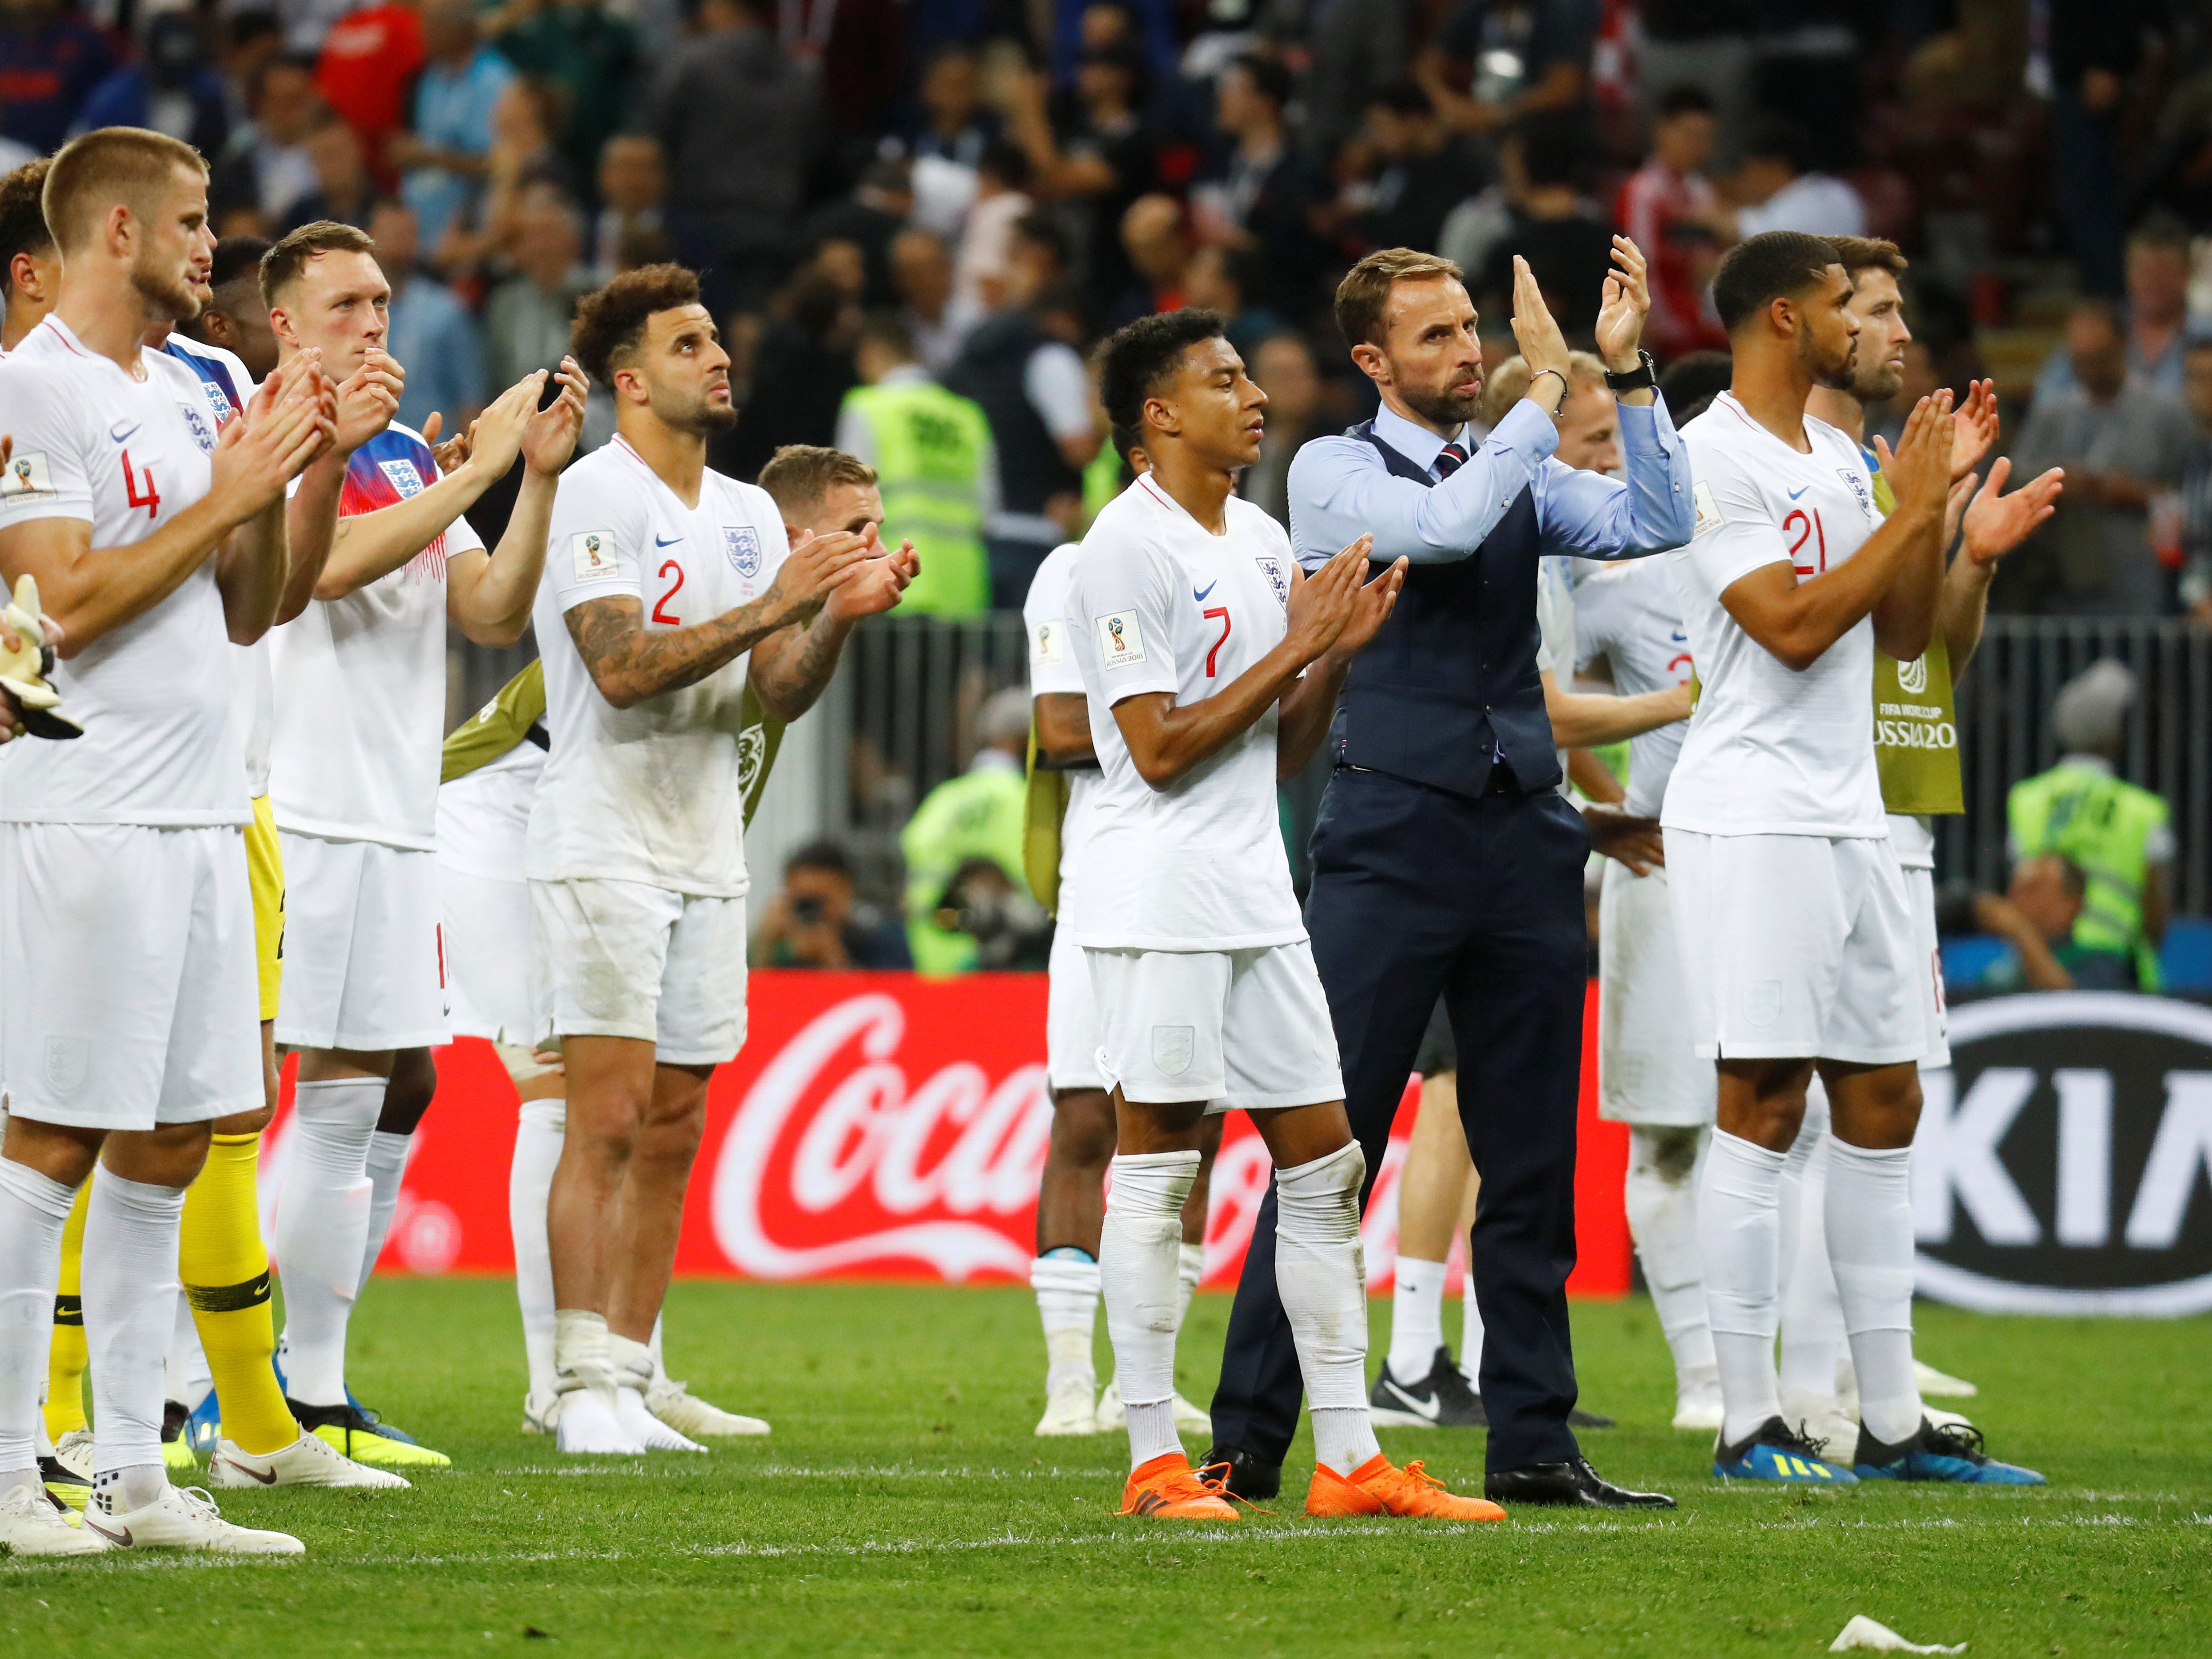 The headlines that never were after England World Cup defeat but team hailed as 'heroes' on front pages nonetheless